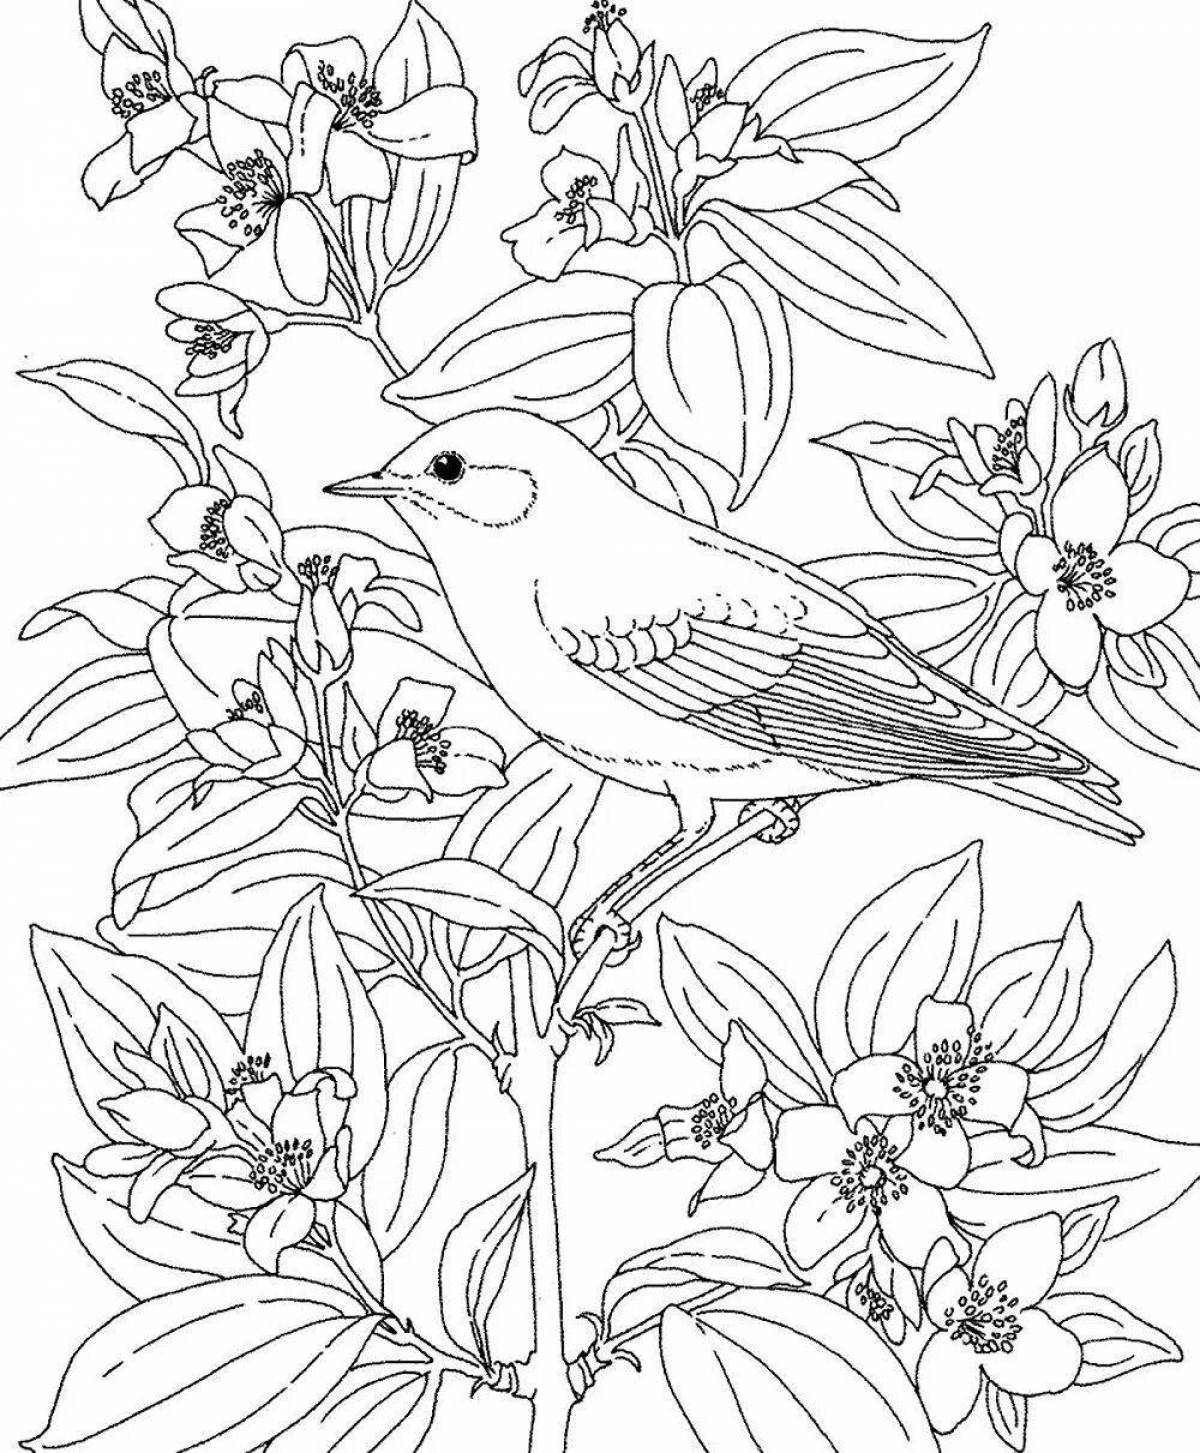 Exquisite bird coloring book for girls